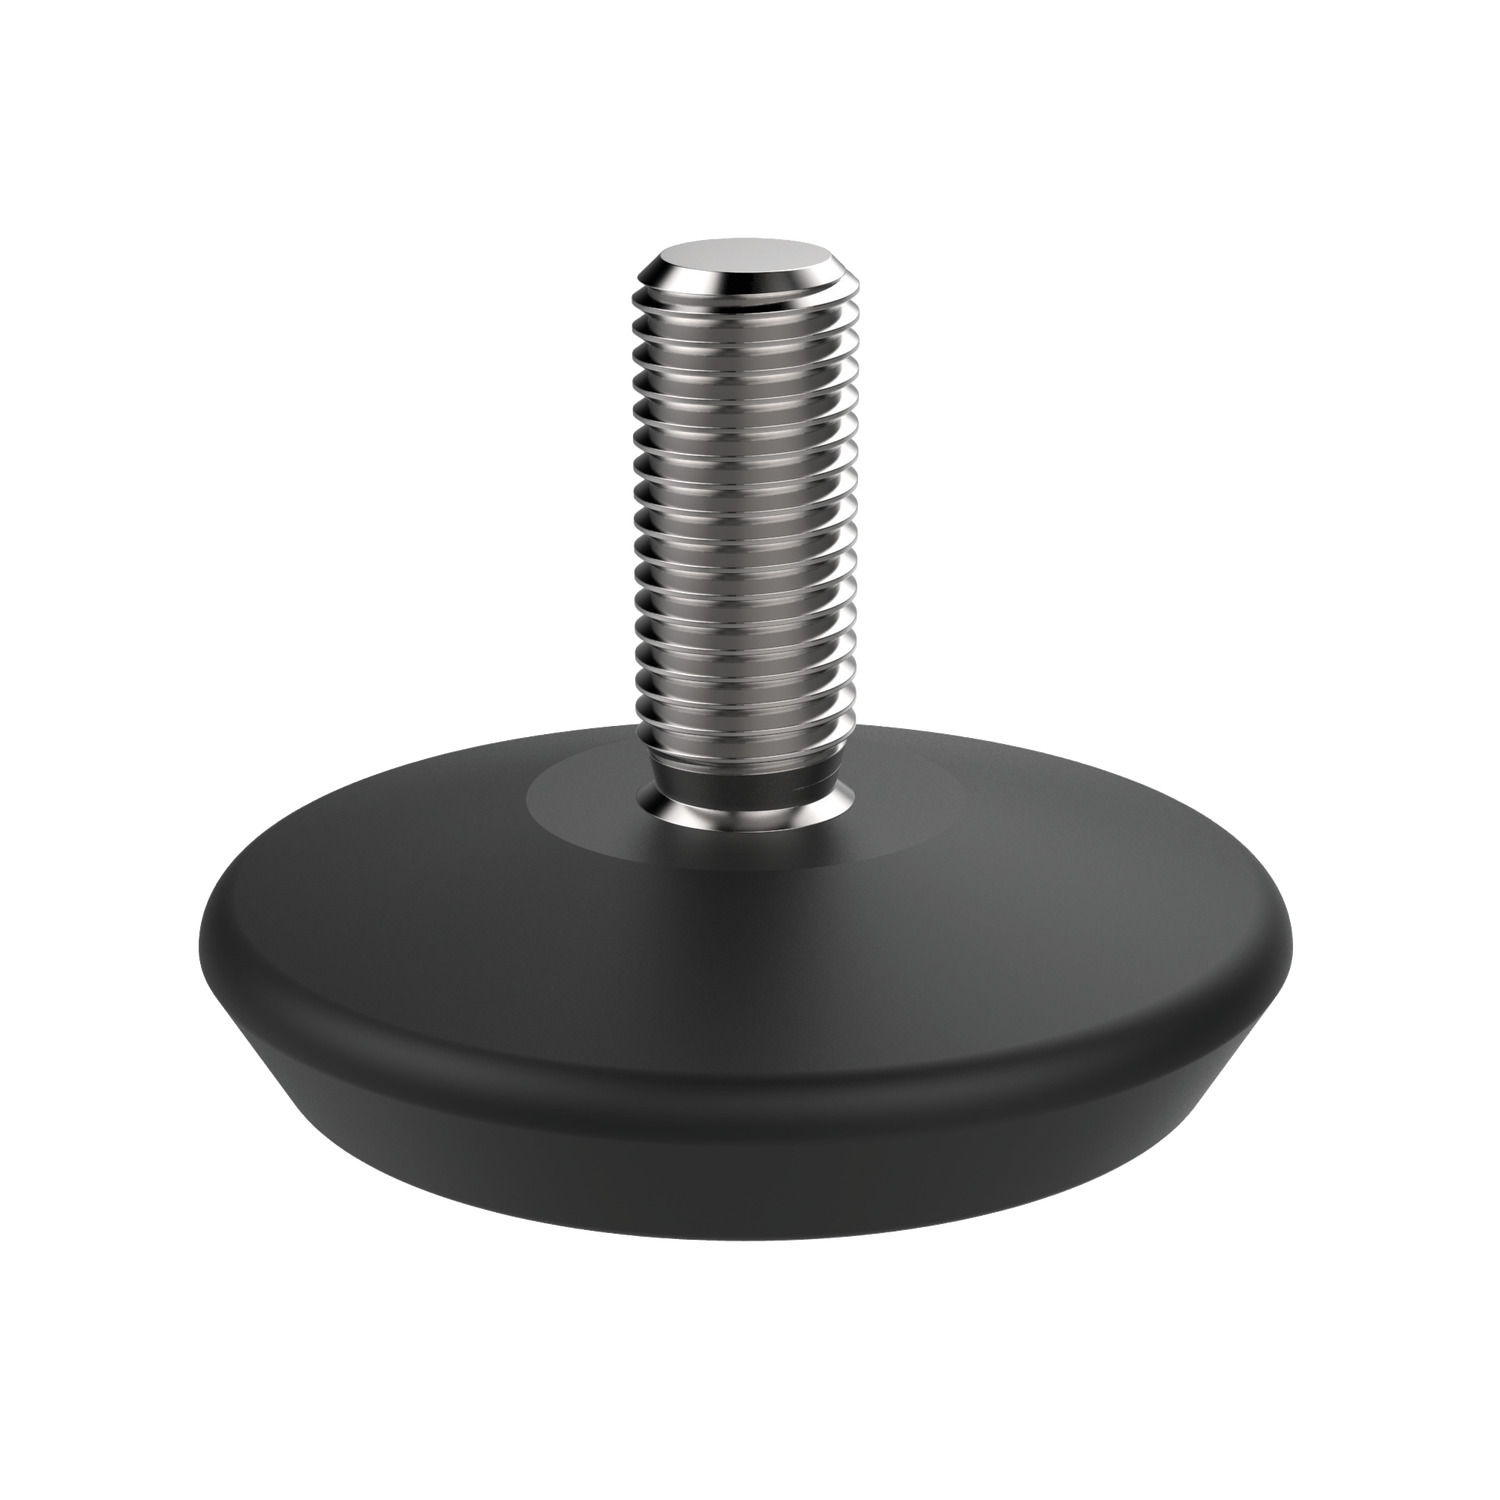 Product 34618, Mini Levelling Feet steel with plastic base / 